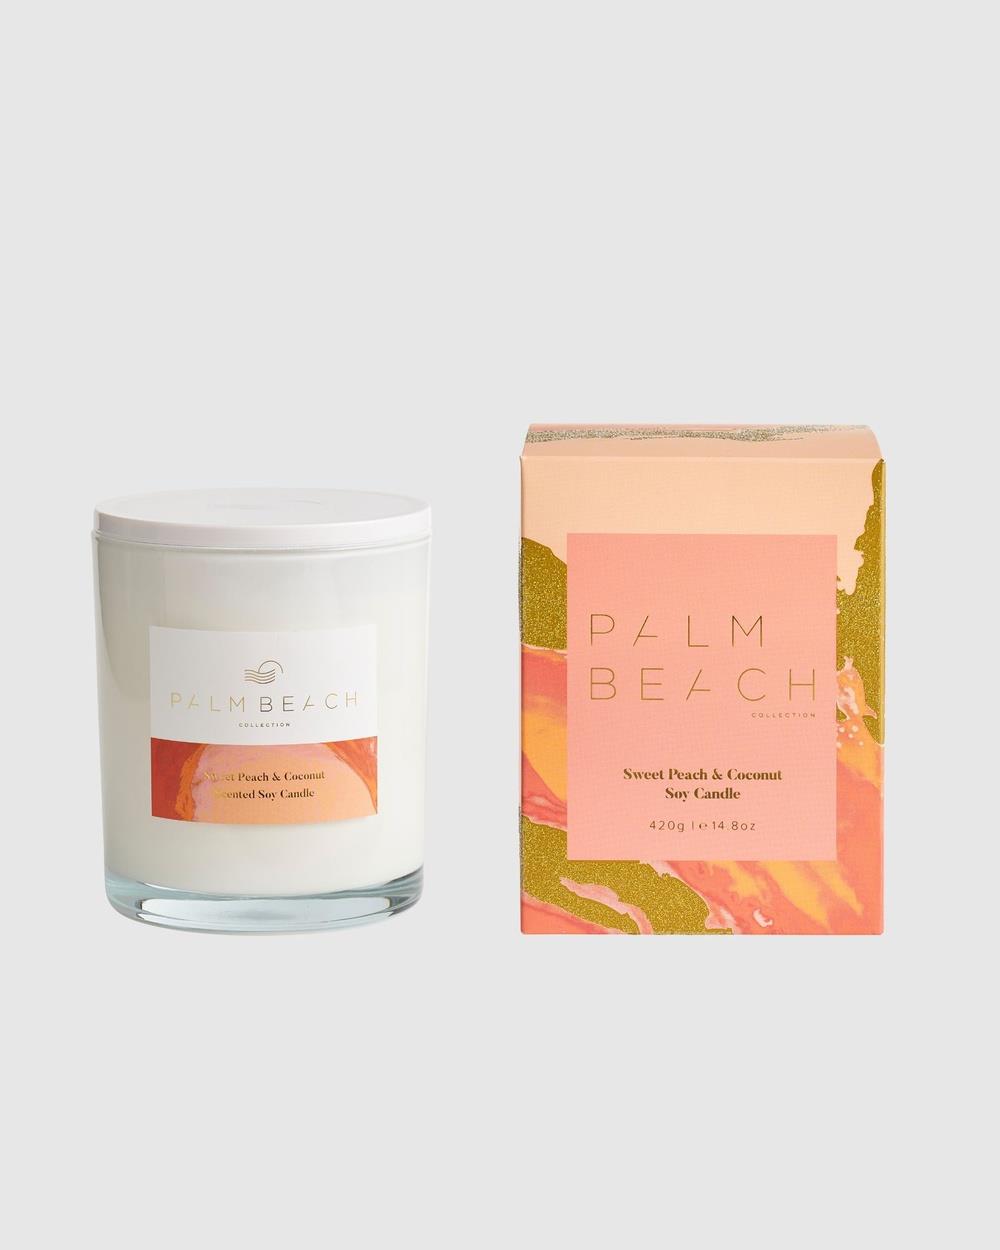 Palm Beach Collection - Sweet Peach & Coconut 420g Scented Soy Candle - Home Fragrance (Orange) Sweet Peach & Coconut 420g Scented Soy Candle